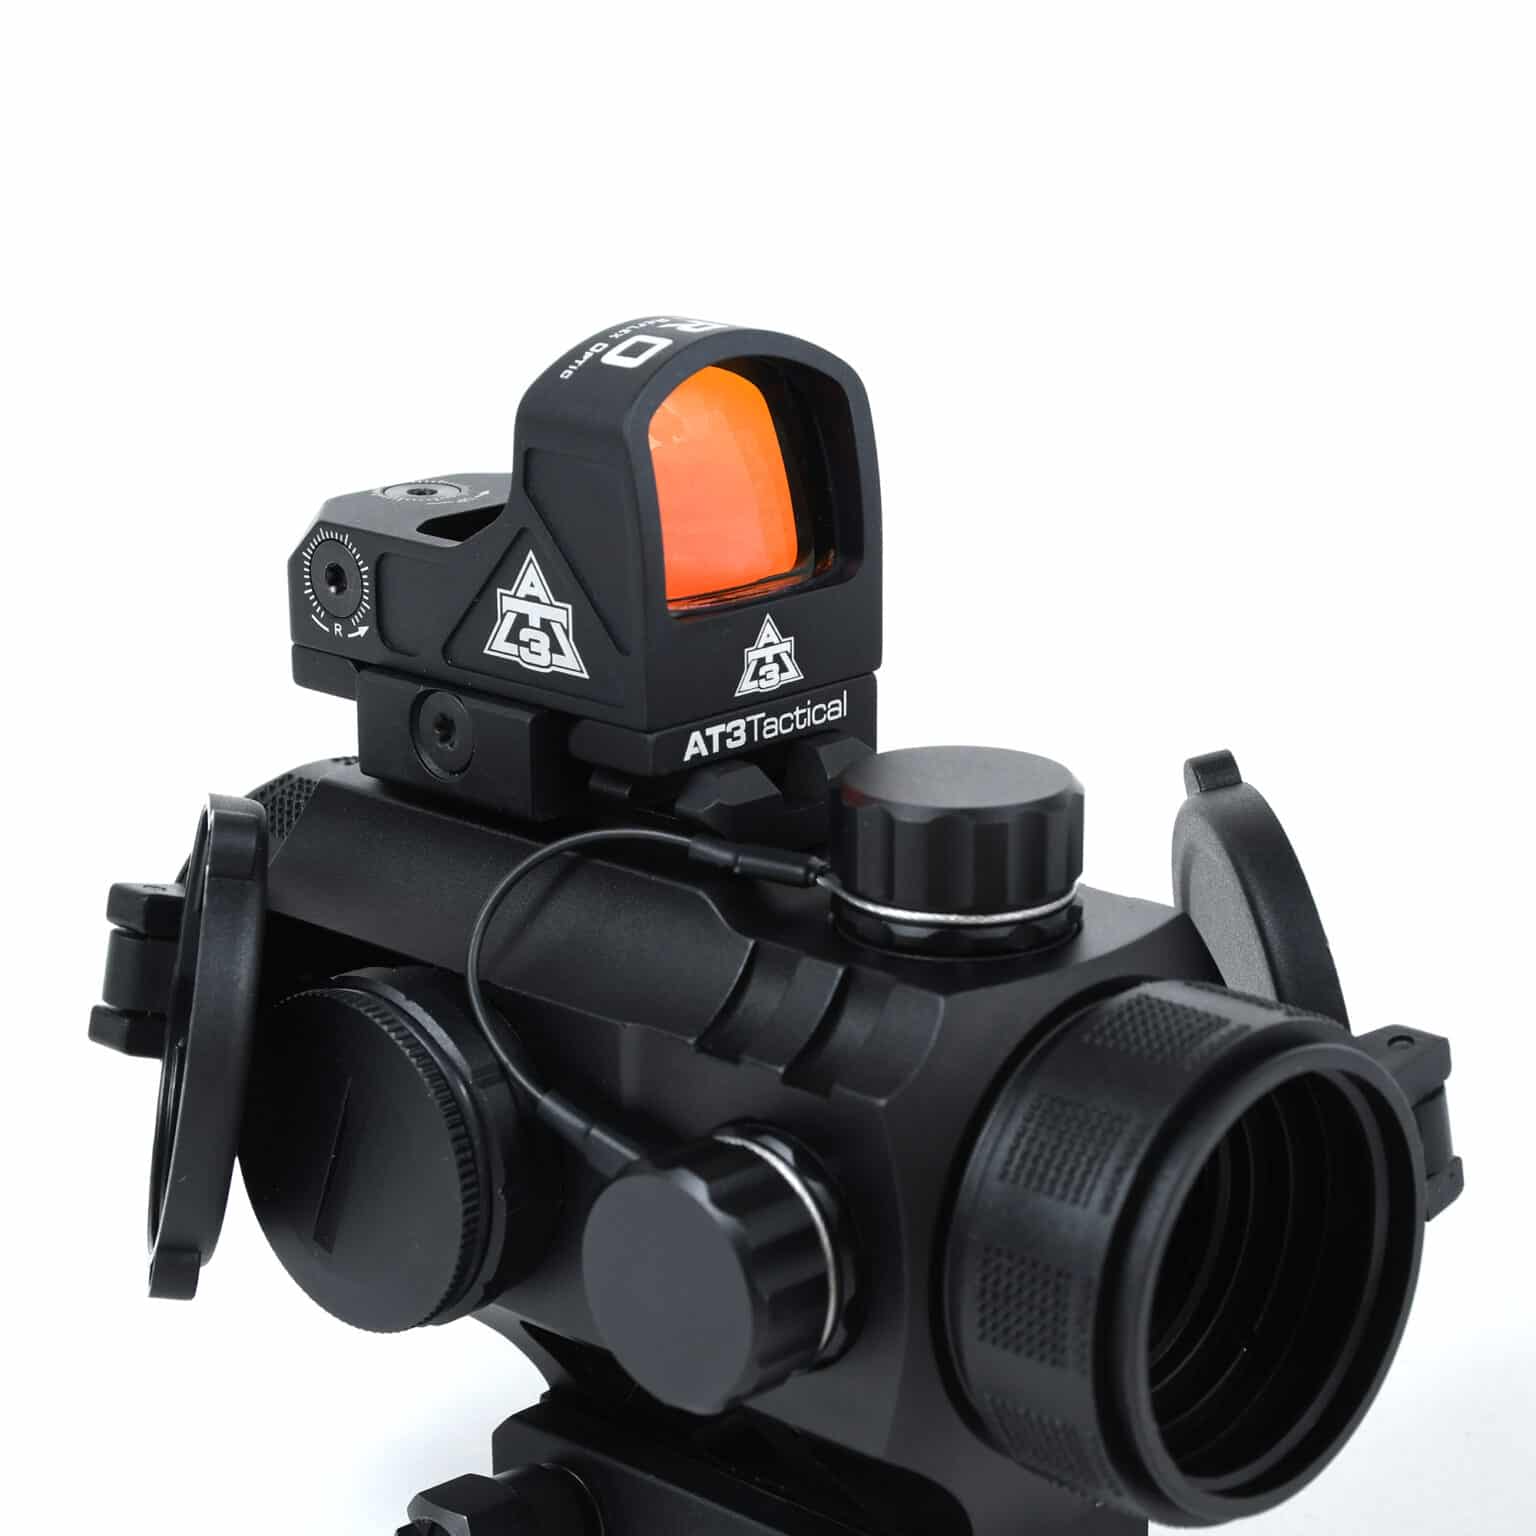 At3™ 3xp Aro Combo Includes 3x Prism Scope And Micro Red Dot Reflex Sight